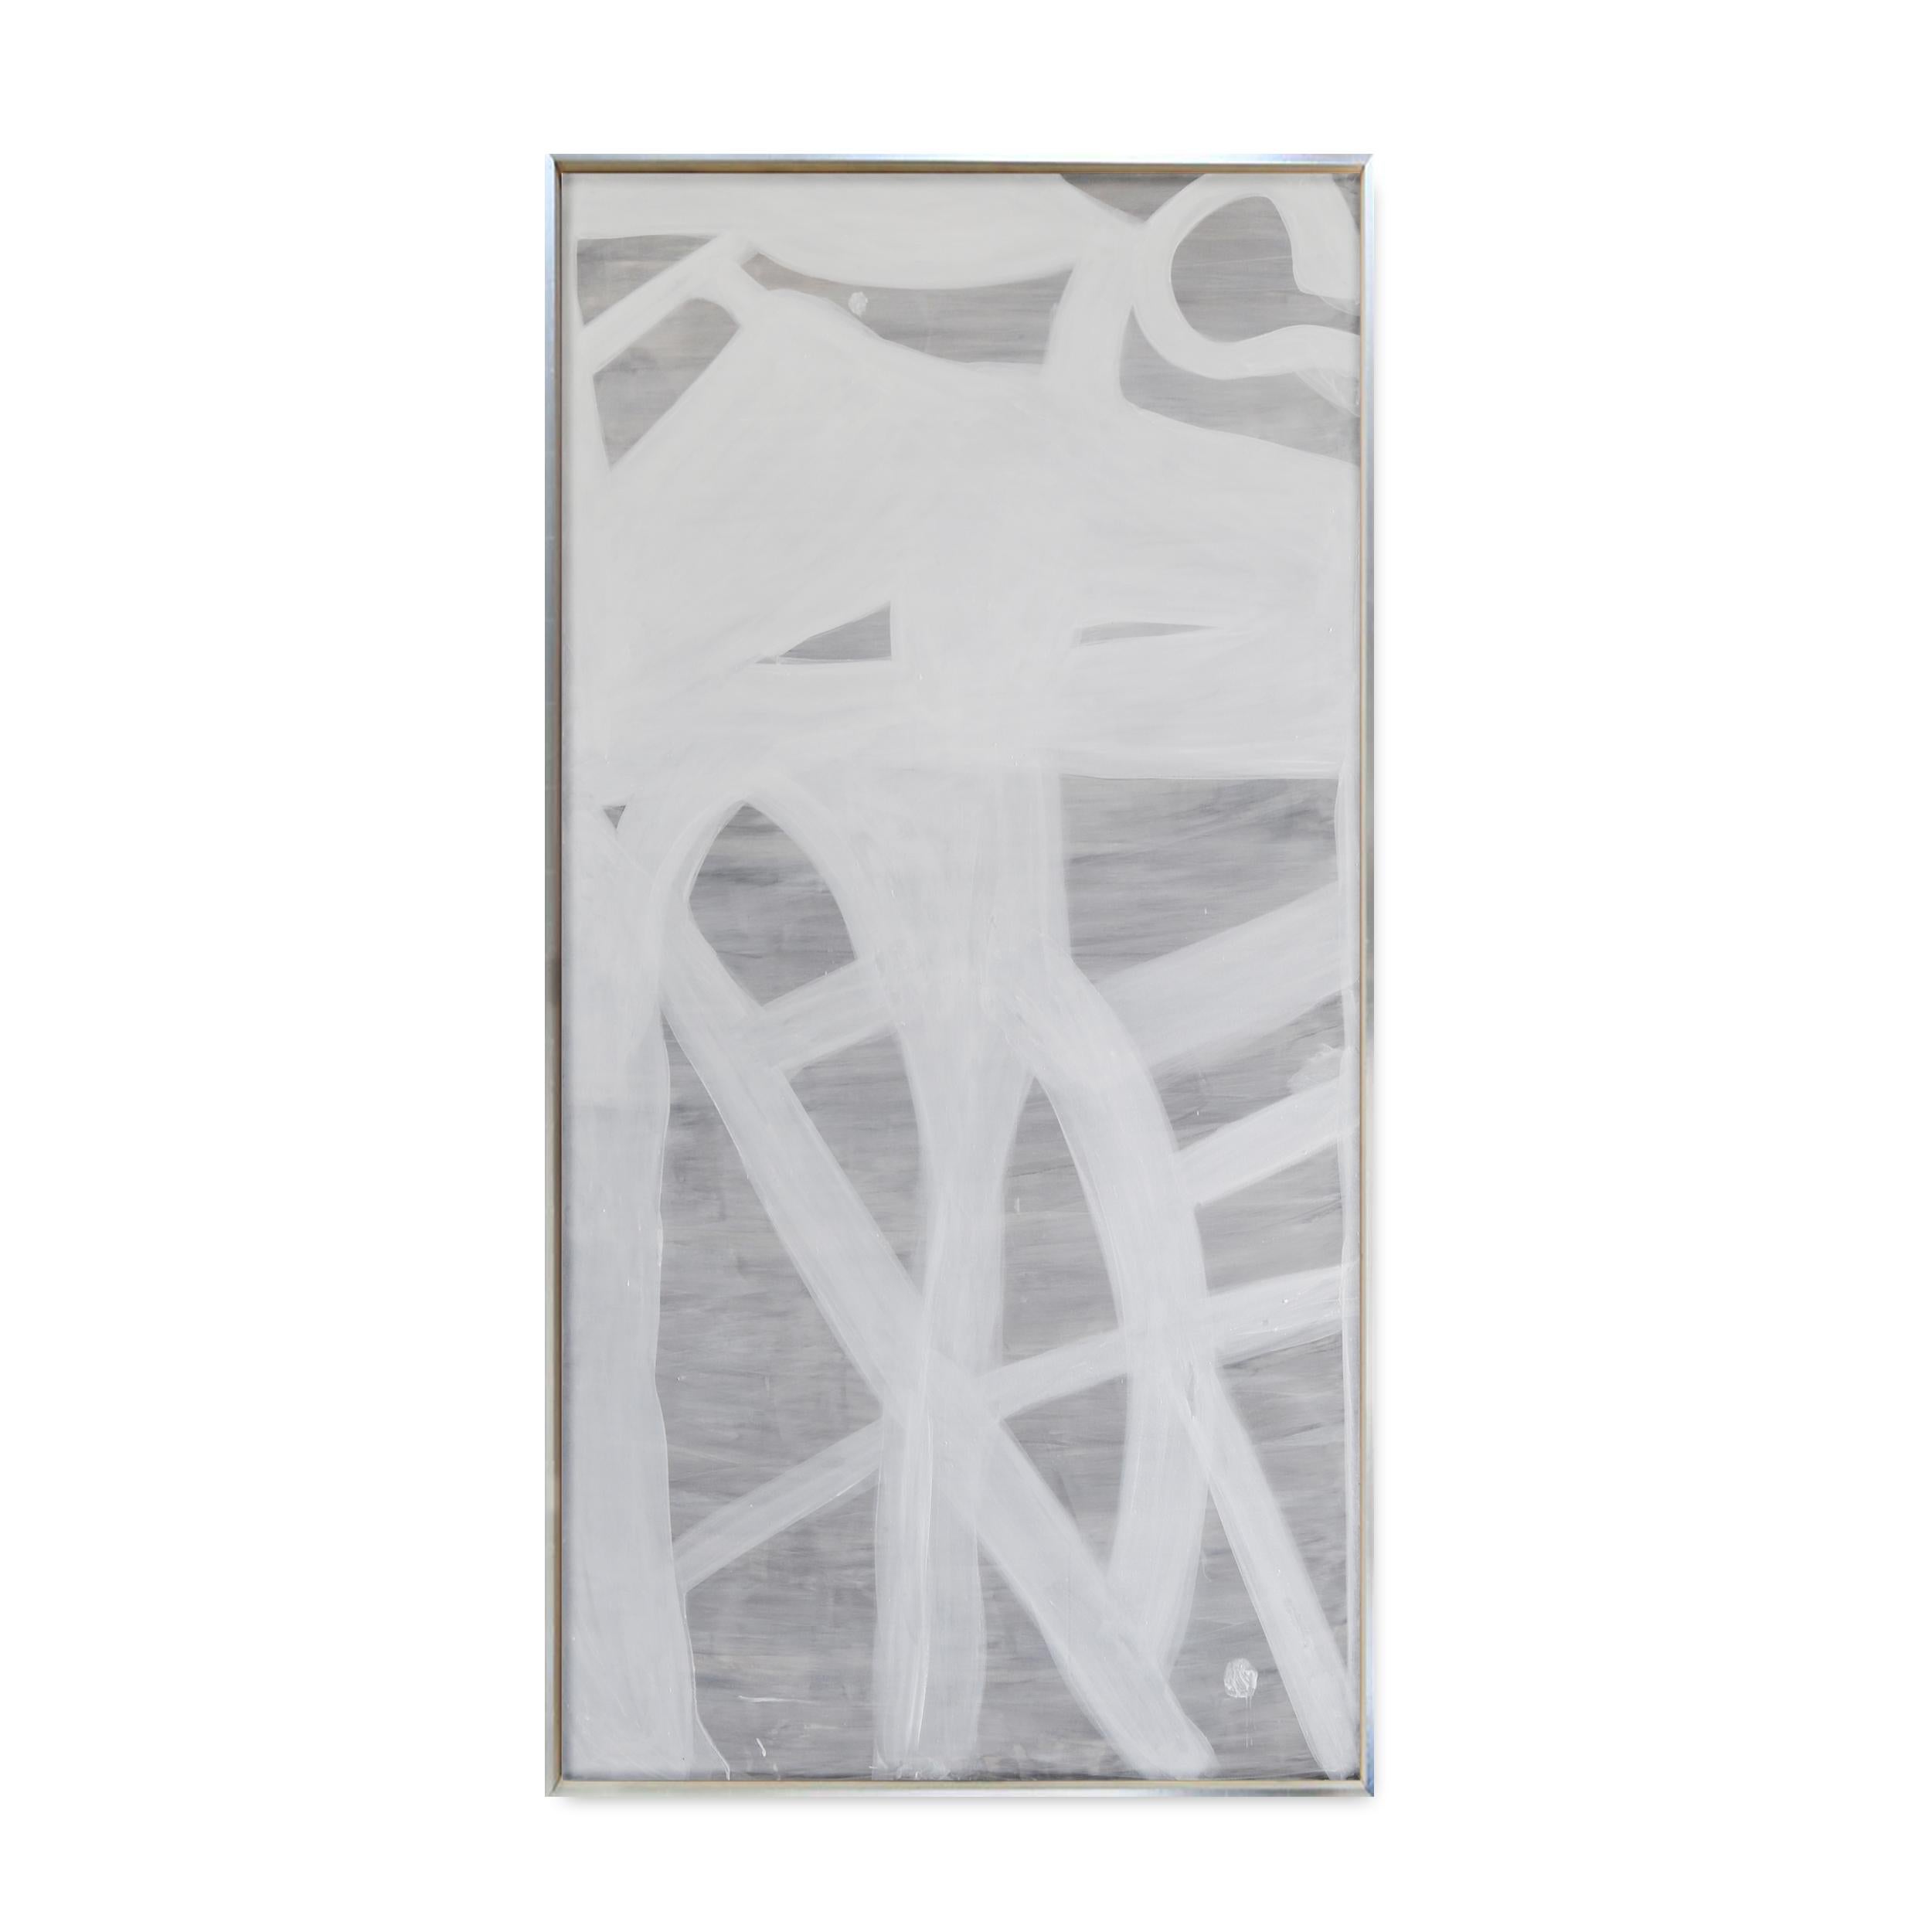 Kim Fonder
ETNOGRAFICA BLANC VI
Mixed Media on Canvas
72.00 X 36.00 in
$4,300.00

Kim Fonder loves texture and touch. Her paintings and furniture reflect her infatuation with these two characteristics. From the materials Fonder selects, to the way